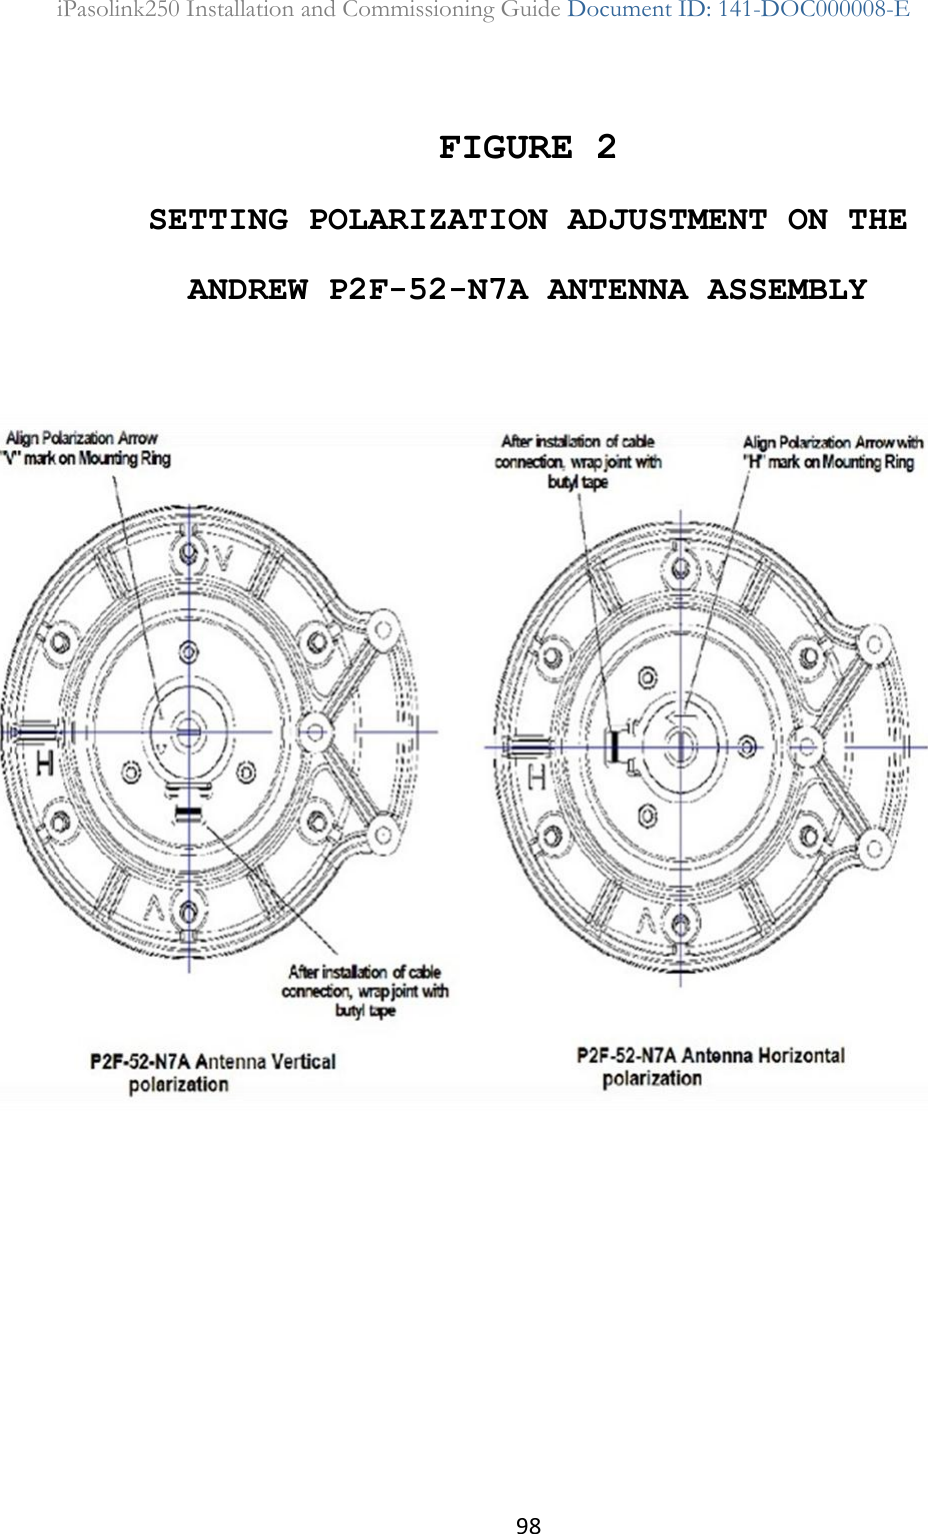 98 iPasolink250 Installation and Commissioning Guide Document ID: 141-DOC000008-E   FIGURE 2 SETTING POLARIZATION ADJUSTMENT ON THE  ANDREW P2F-52-N7A ANTENNA ASSEMBLY      